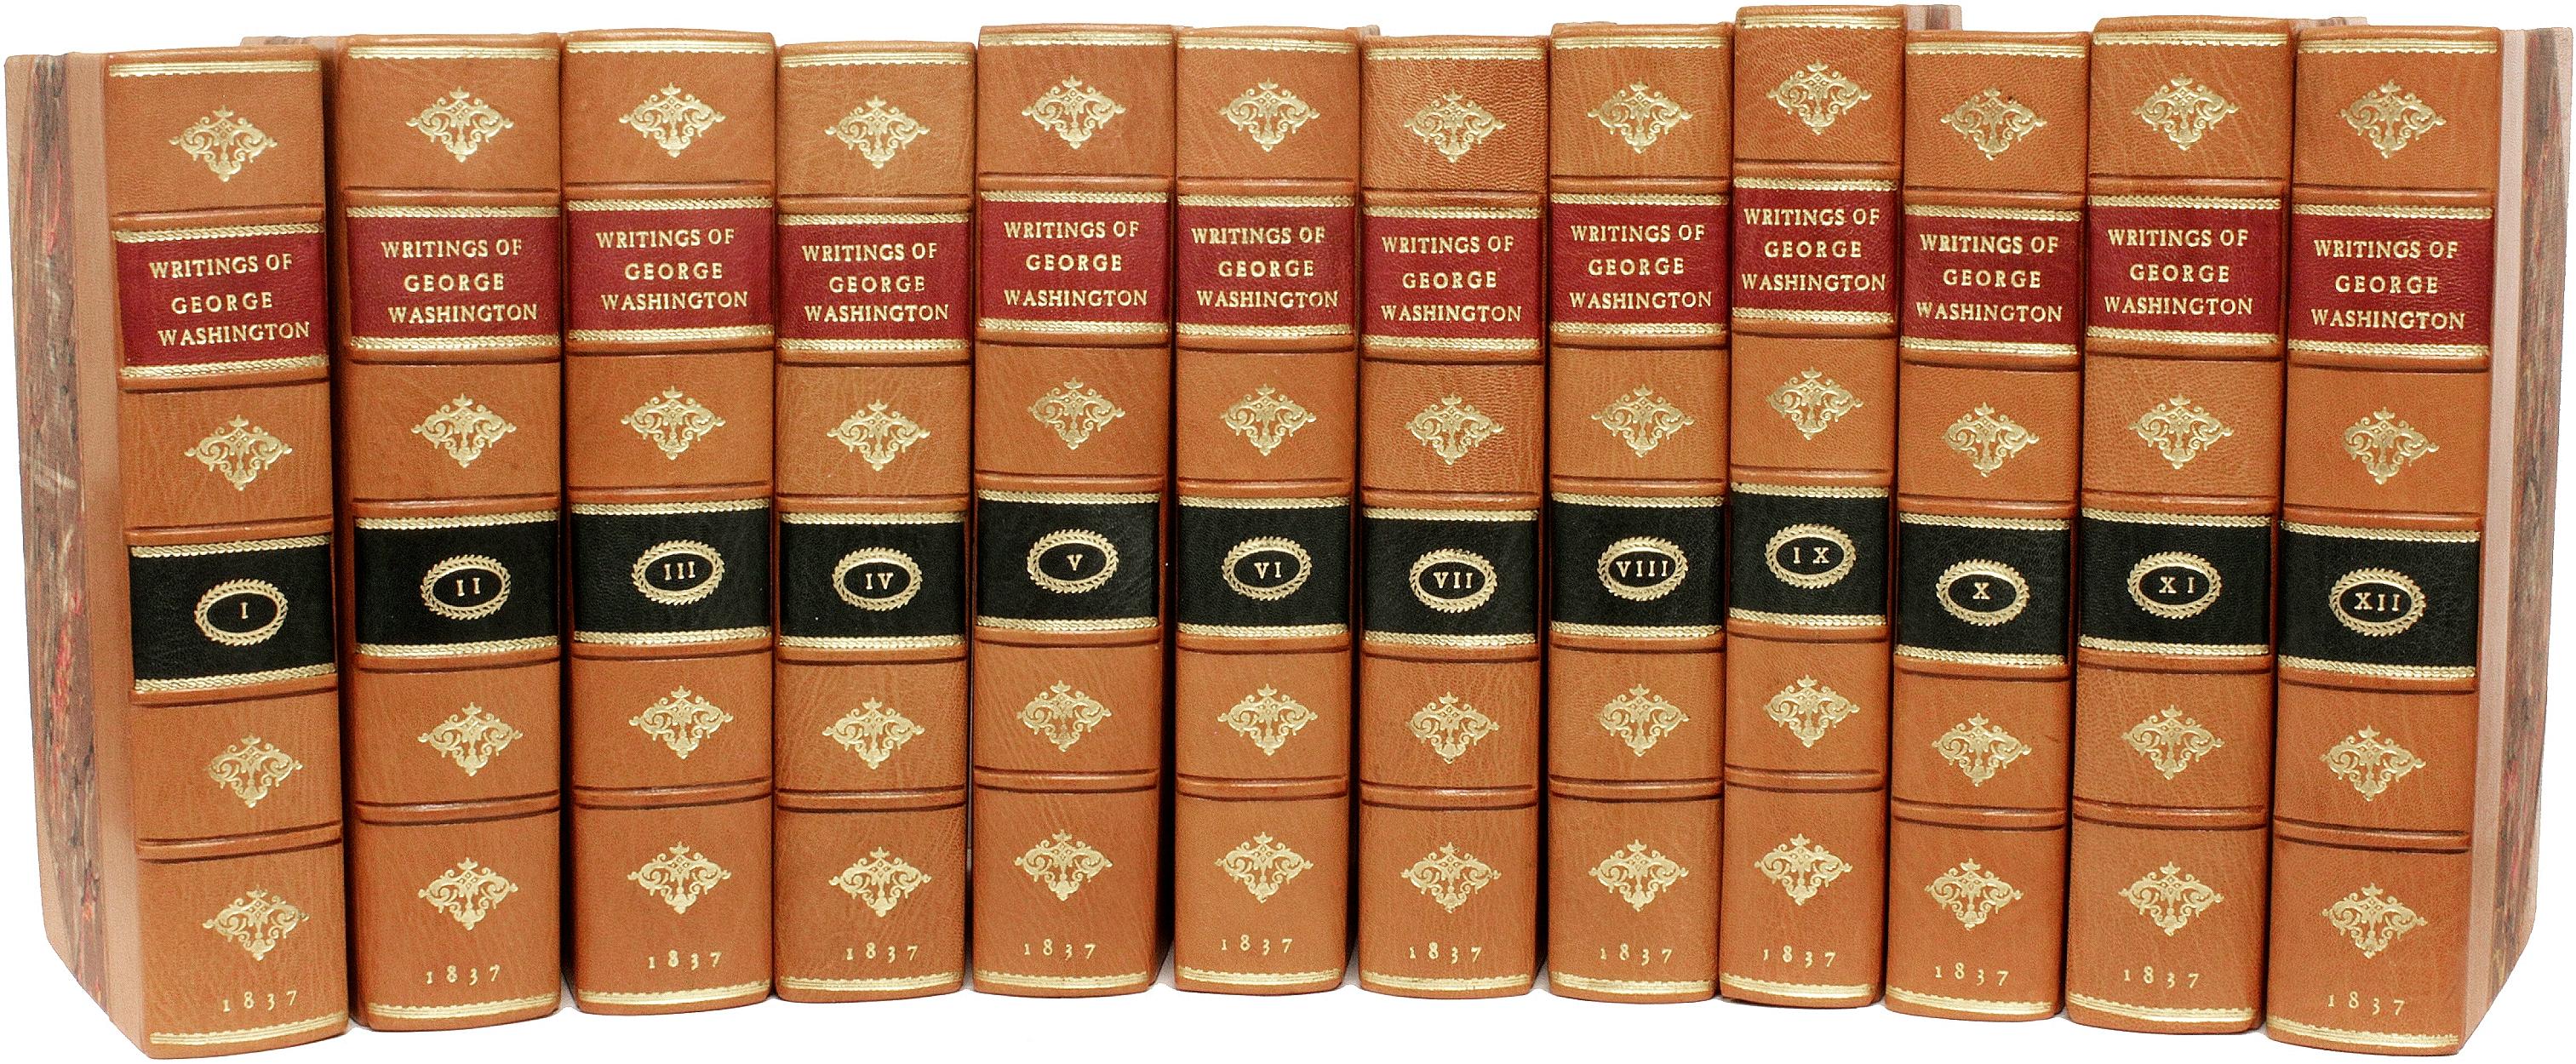 Mid-19th Century The Writings of George Washington. 12 VOLS - 1837 - IN A FINE LEATHER BINDING!